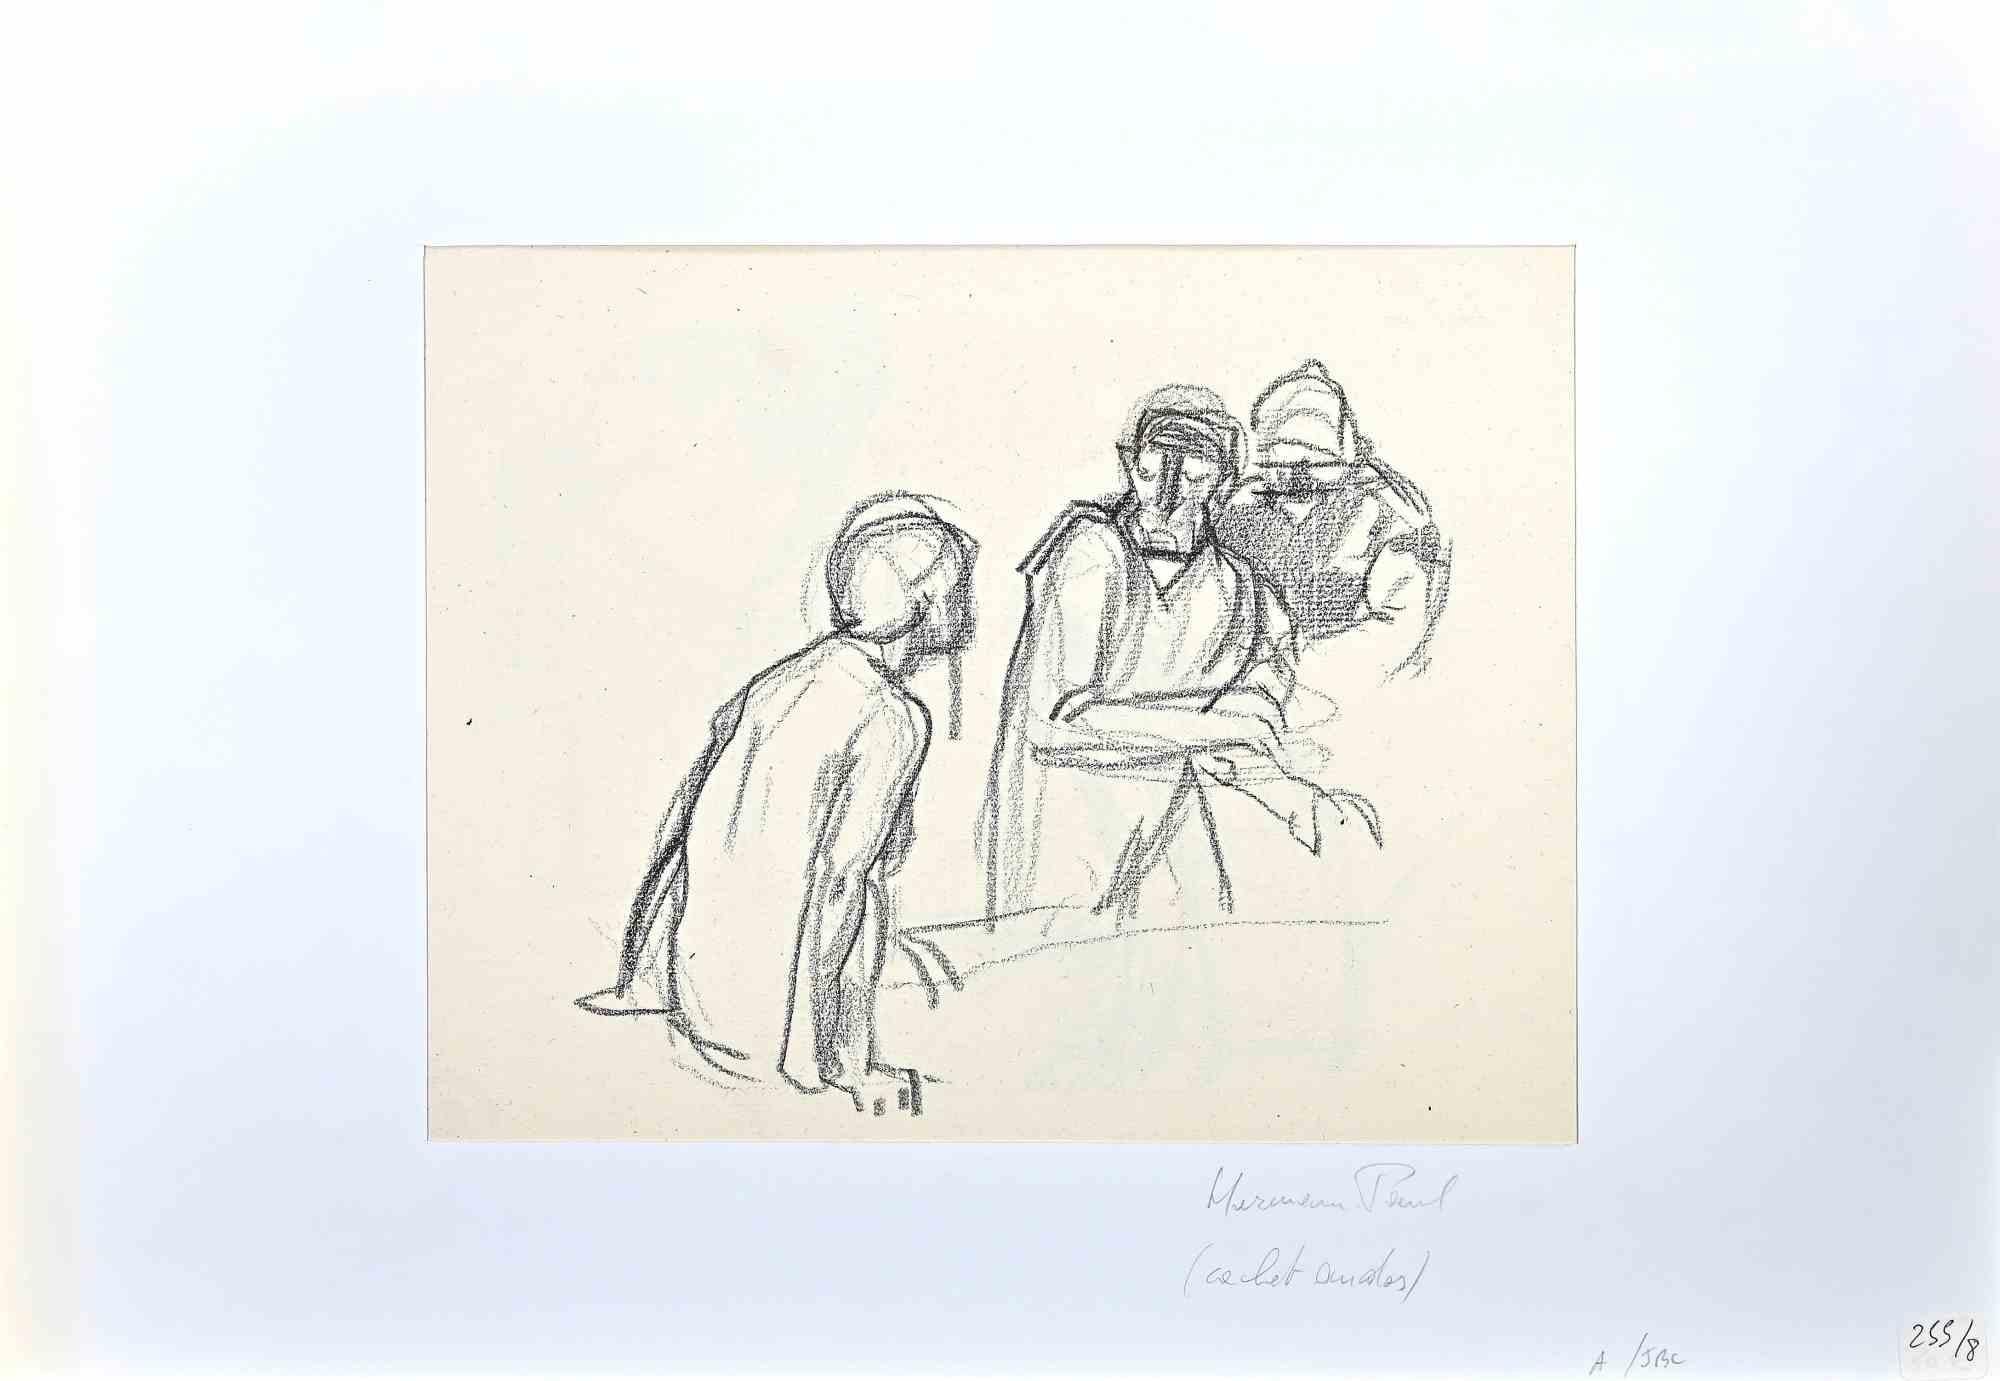 Les Hommes is a charcoal Drawing realized by Hermann Paul .

On the back another drawing. Passpartout included cm 35x51

Good condition.

René Georges Hermann-Paul (27 December 1864 – 23 June 1940) was a French artist. He was born in Paris and died